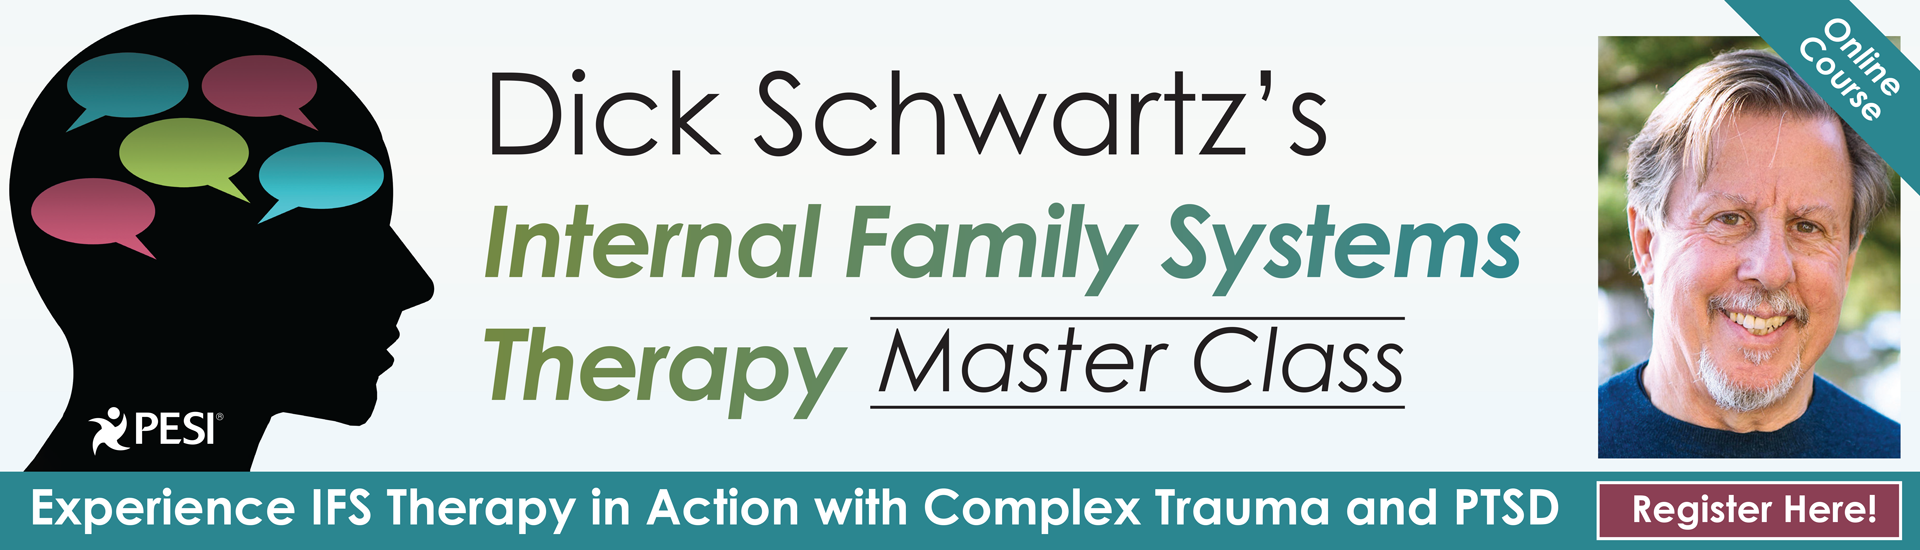 Dick Schwartz's Internal Family Systems Therapy Master Class: Experience IFS Therapy in Action with Complex Trauma and PTSD